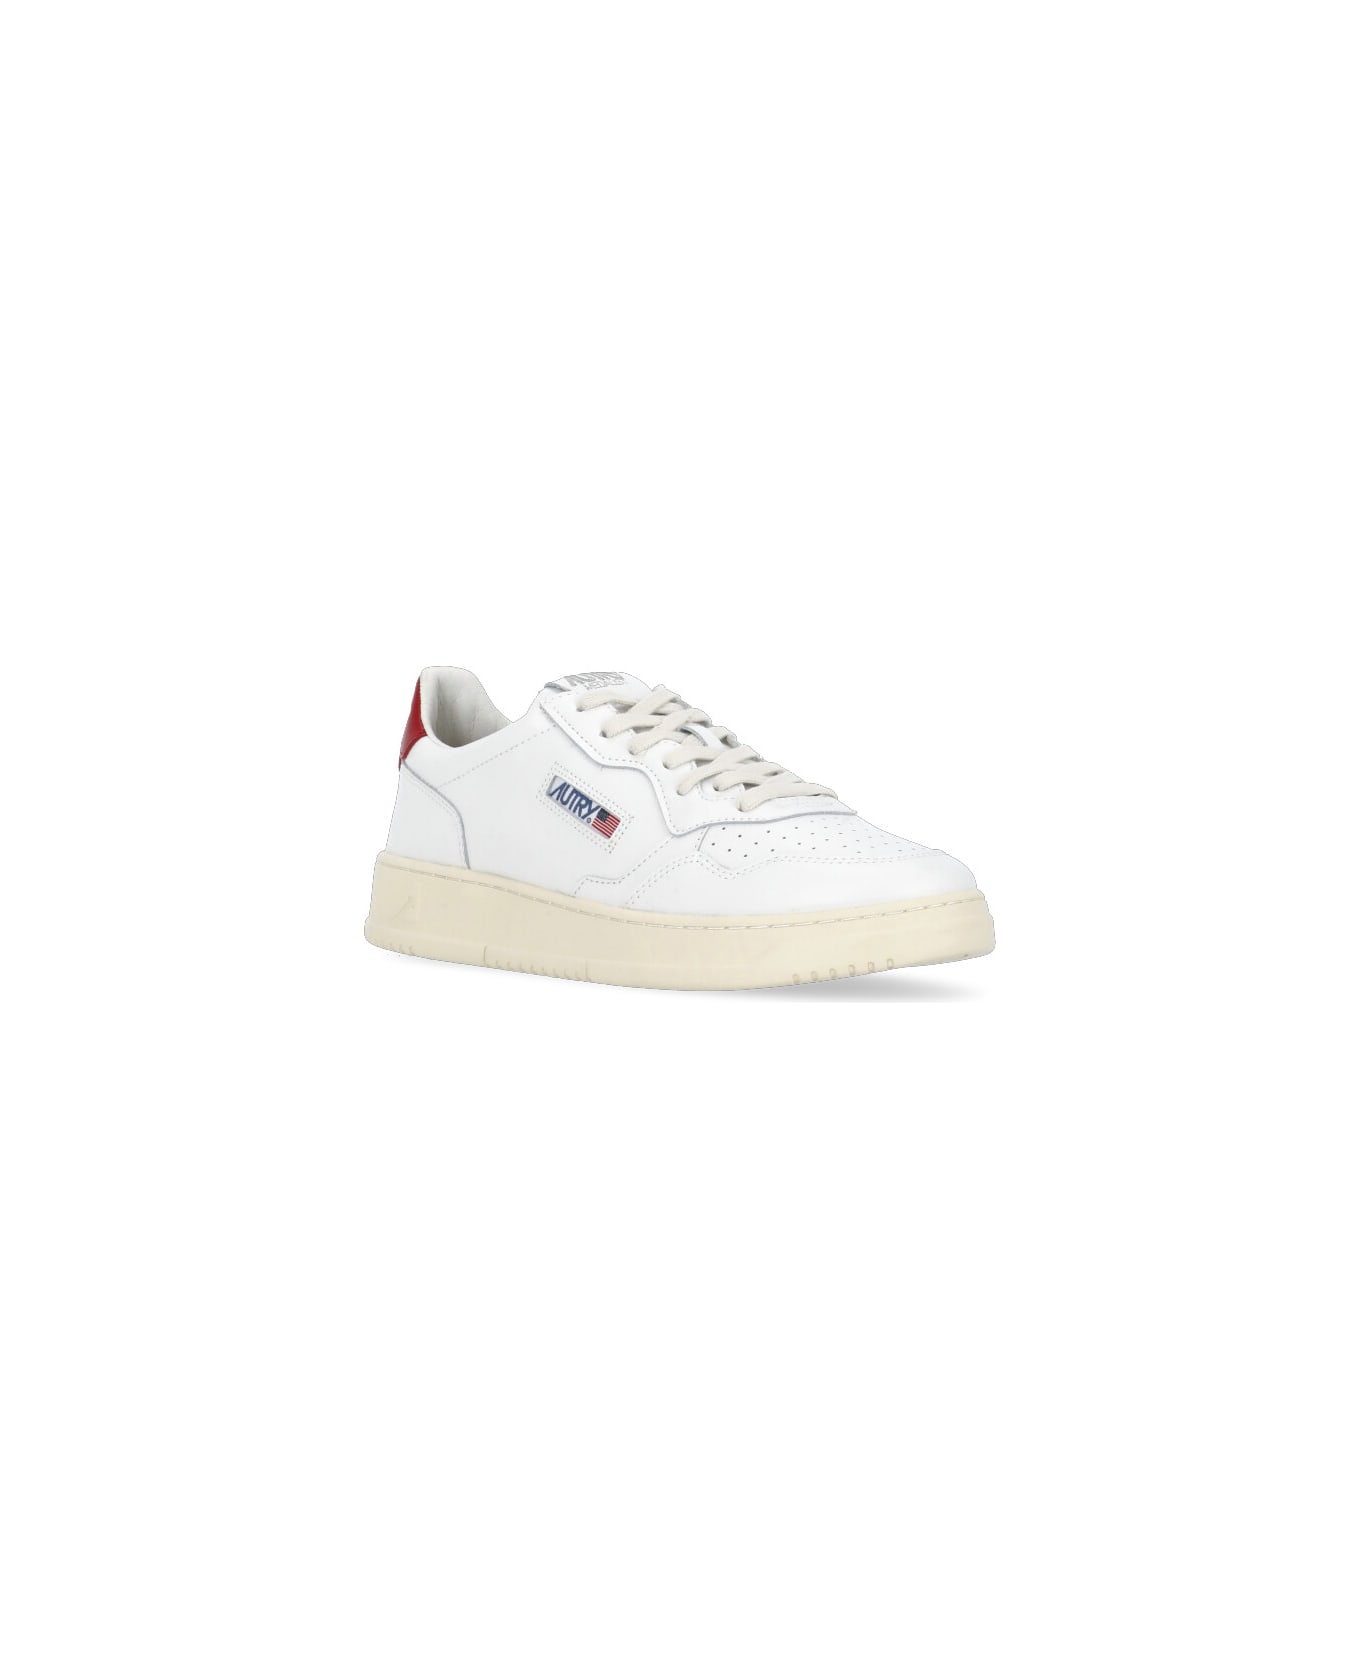 Autry Aulm Ll21 Sneakers - White スニーカー